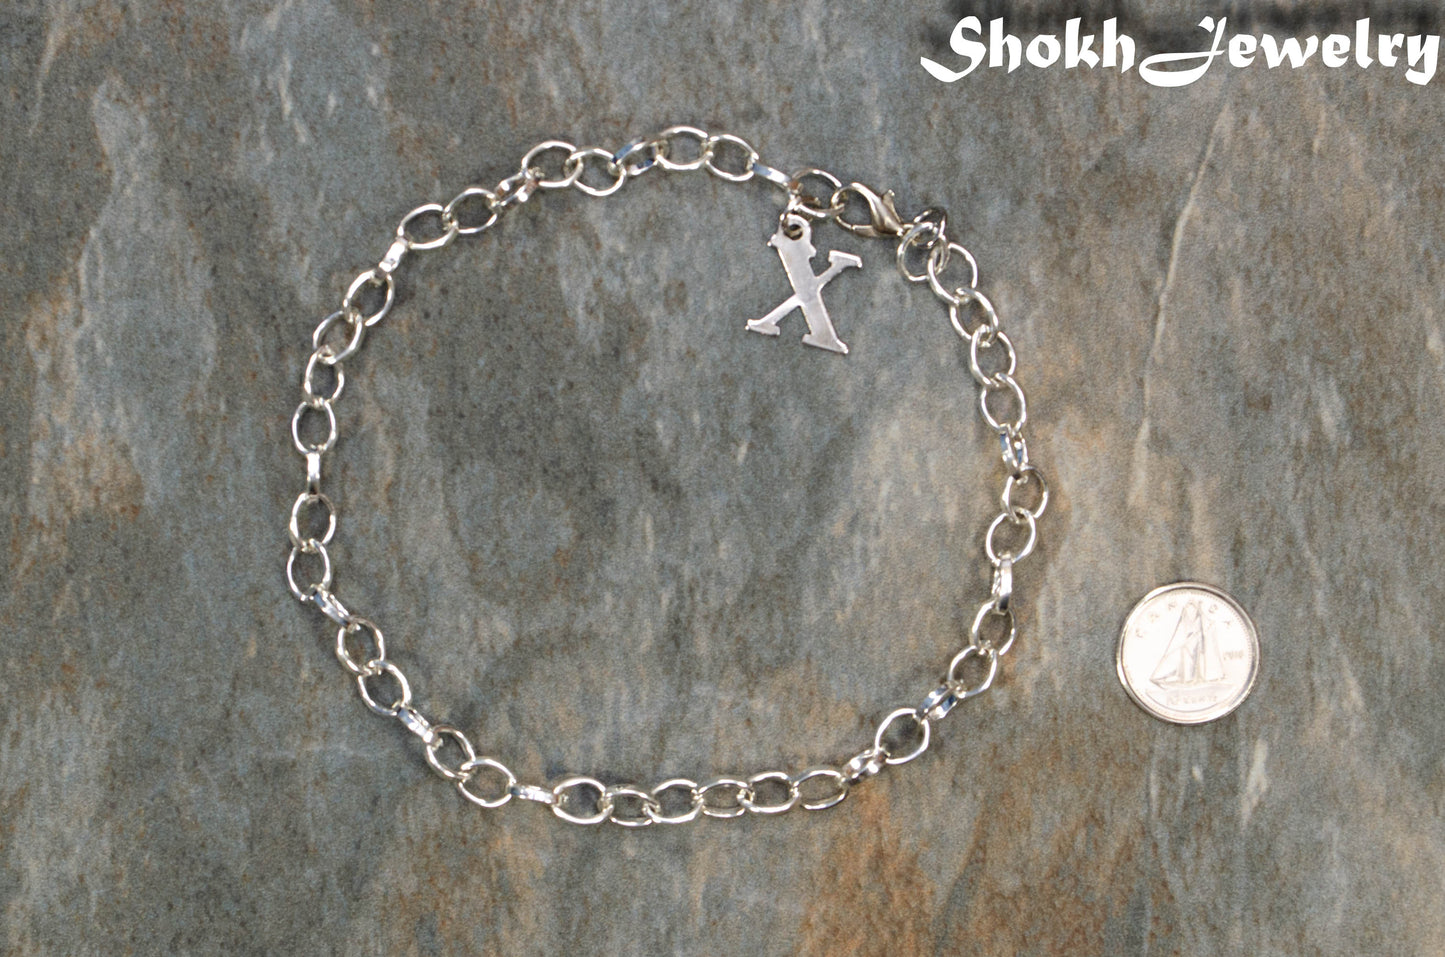 Personalized Initial and Chunky Chain Anklet beside a dime.